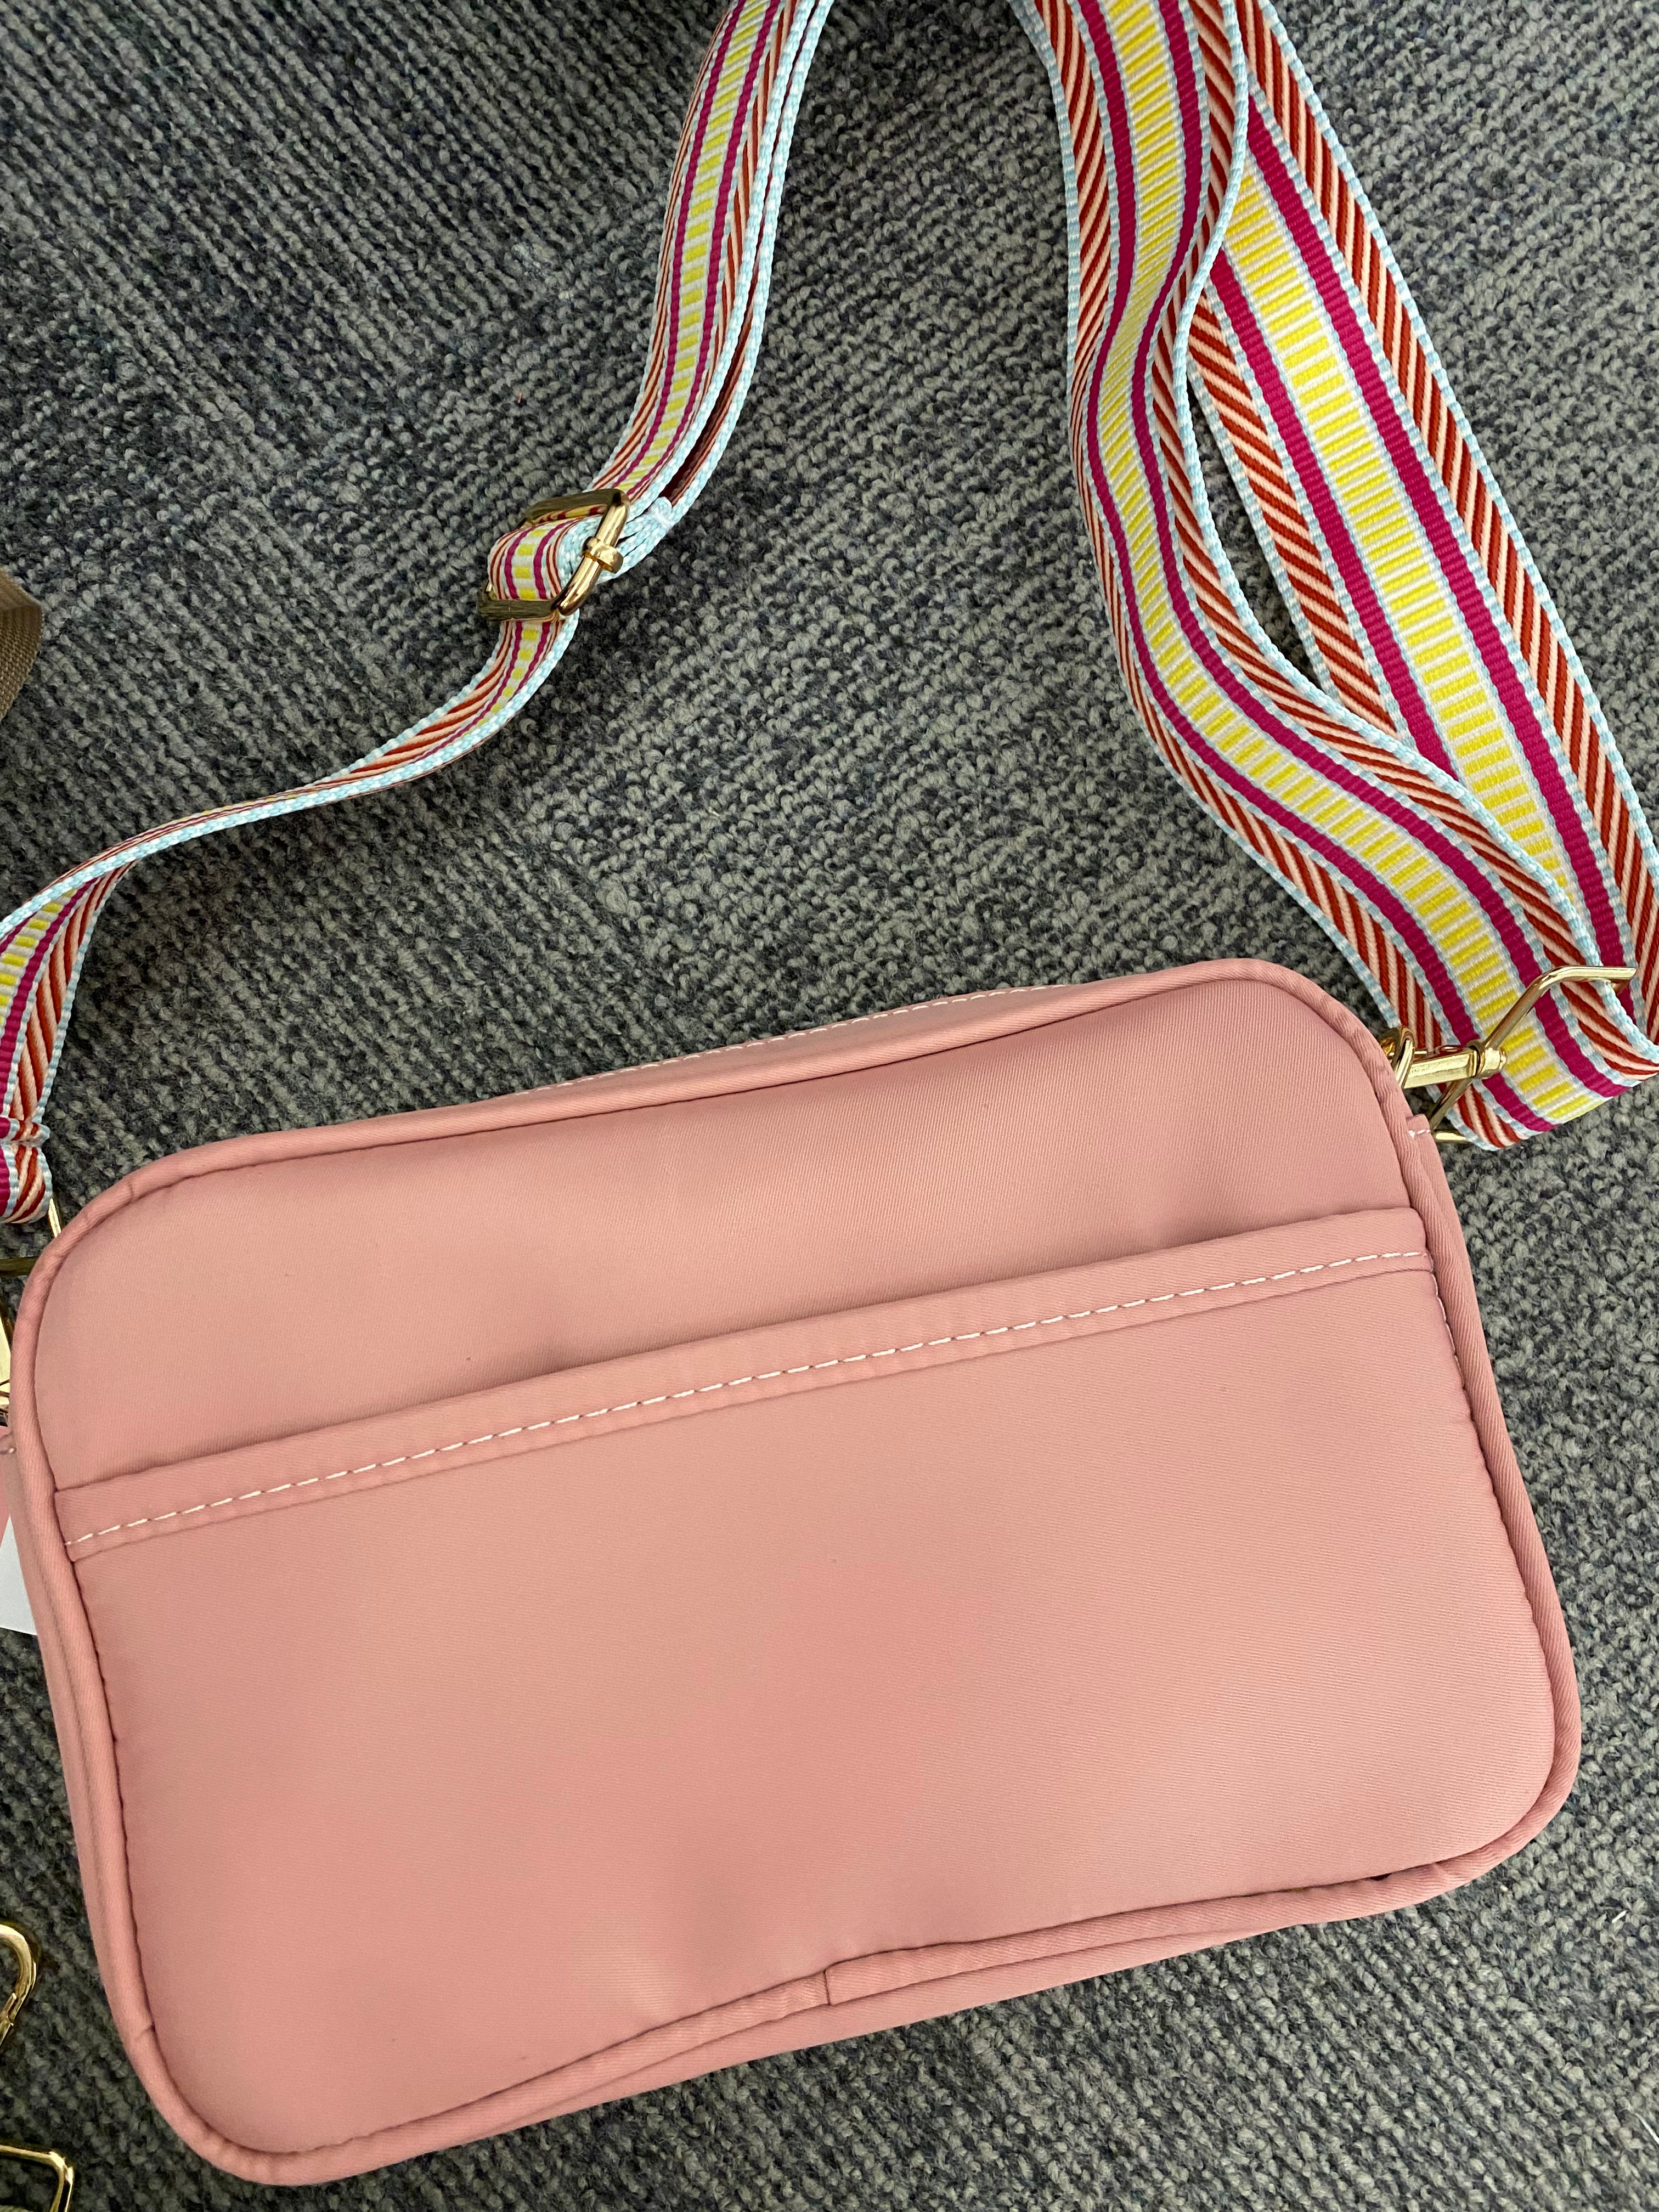 Your Daily Crossbody-Crossbody Bags-The Lovely Closet-The Lovely Closet, Women's Fashion Boutique in Alexandria, KY